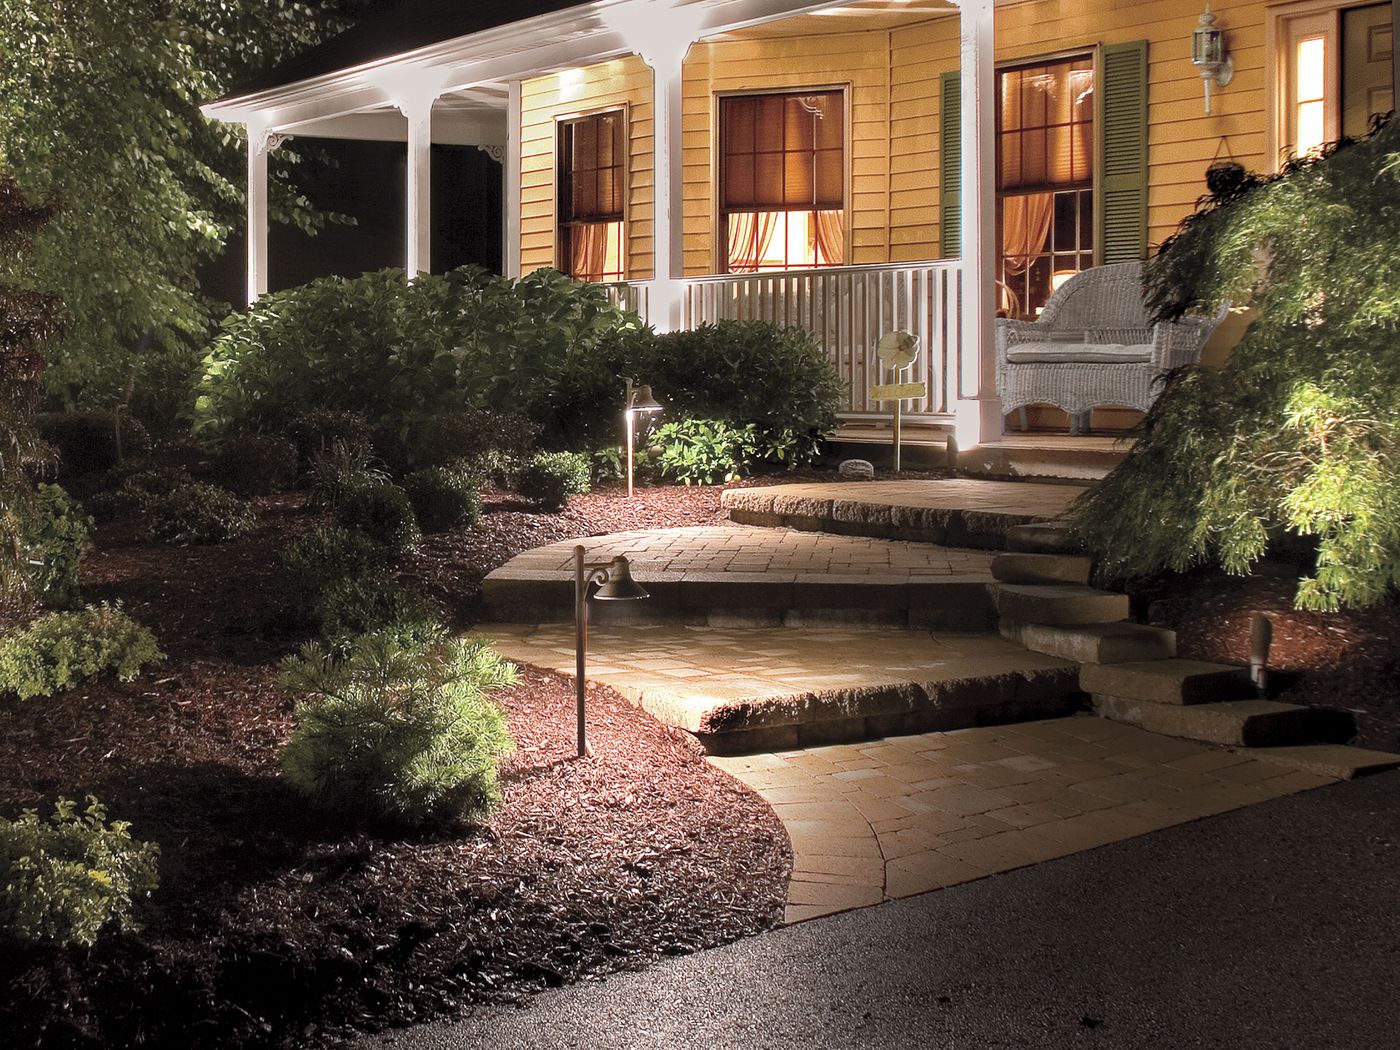 Consider adding outdoor lighting to make entering your home safer